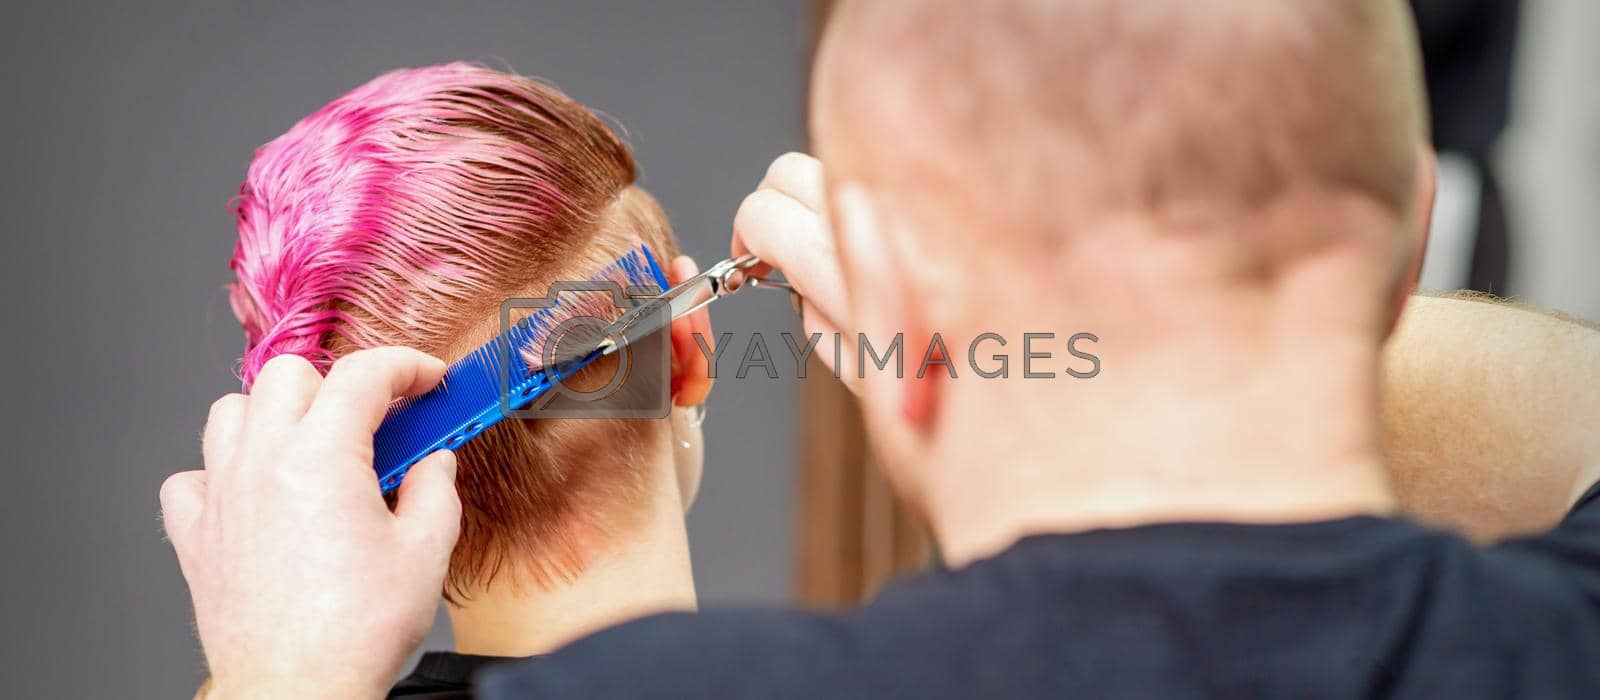 Royalty free image of Woman having a new haircut. Male hairstylist cutting pink short hair with scissors in a hair salon. by okskukuruza